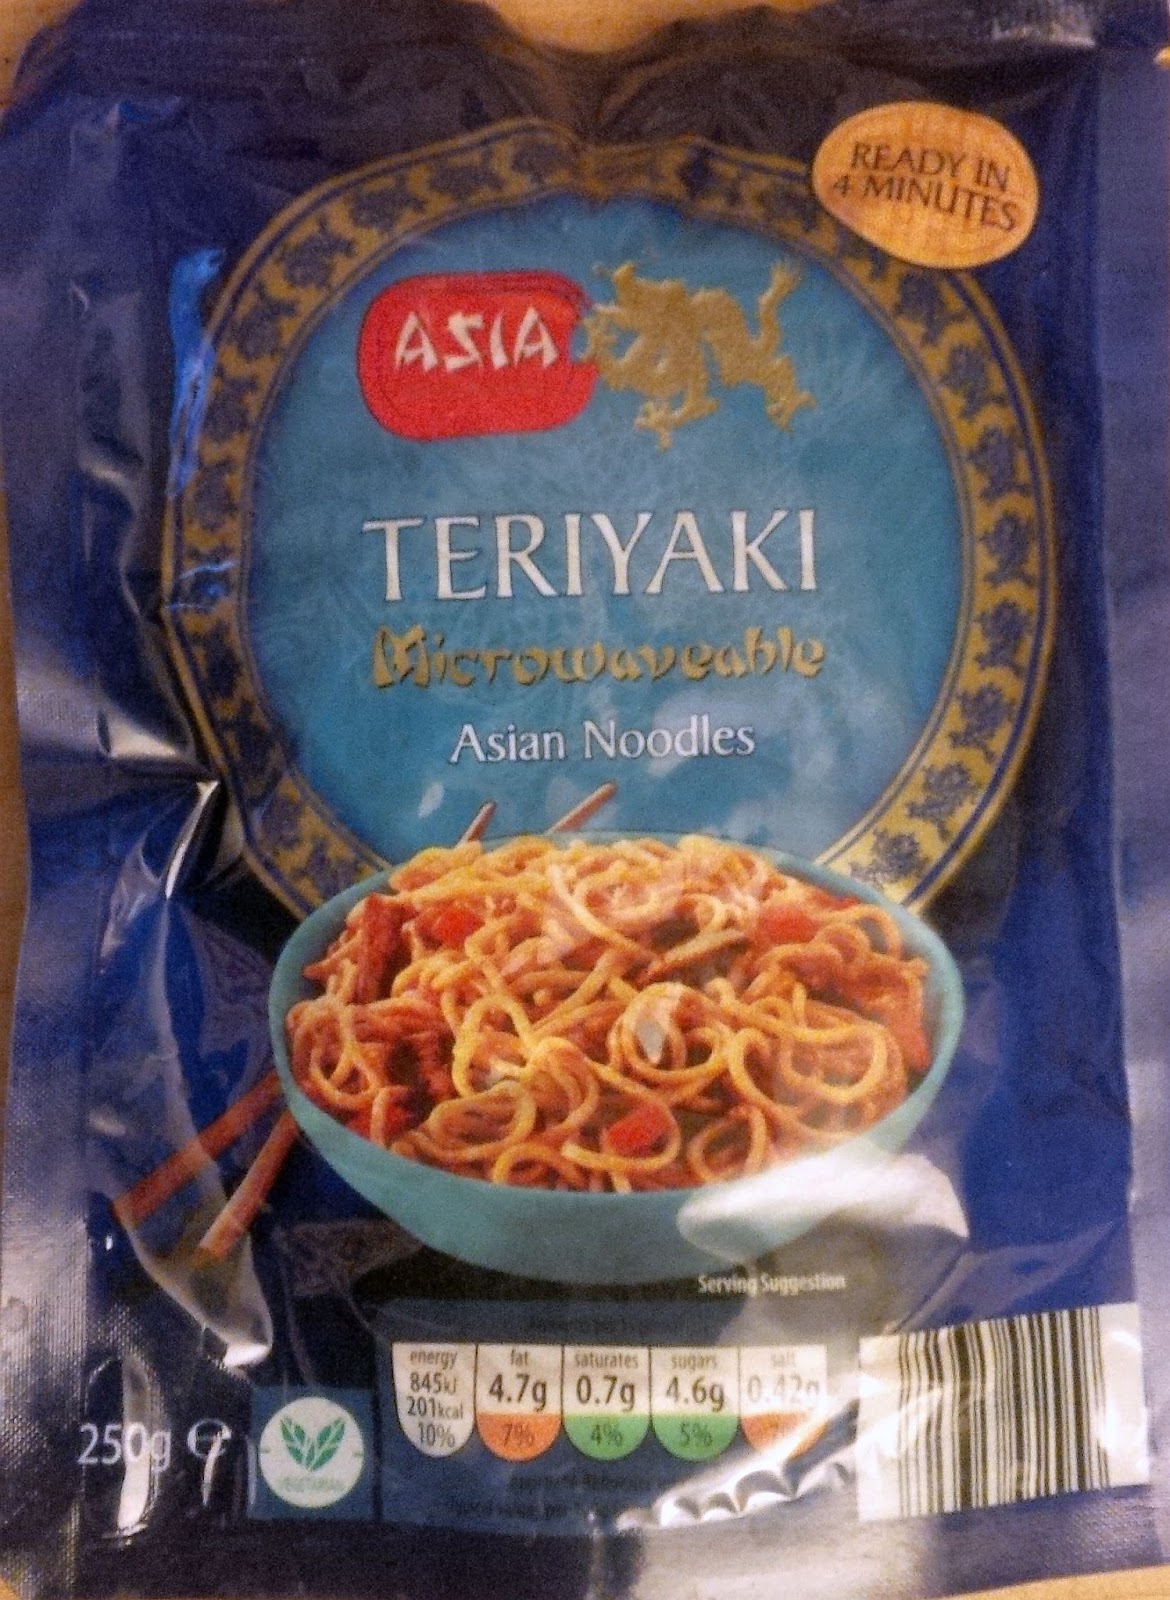 It S A Noodle Bar Not A Wine Bar Aldi Asia Specialities Teriyaki Microwaveable Asian Noodles